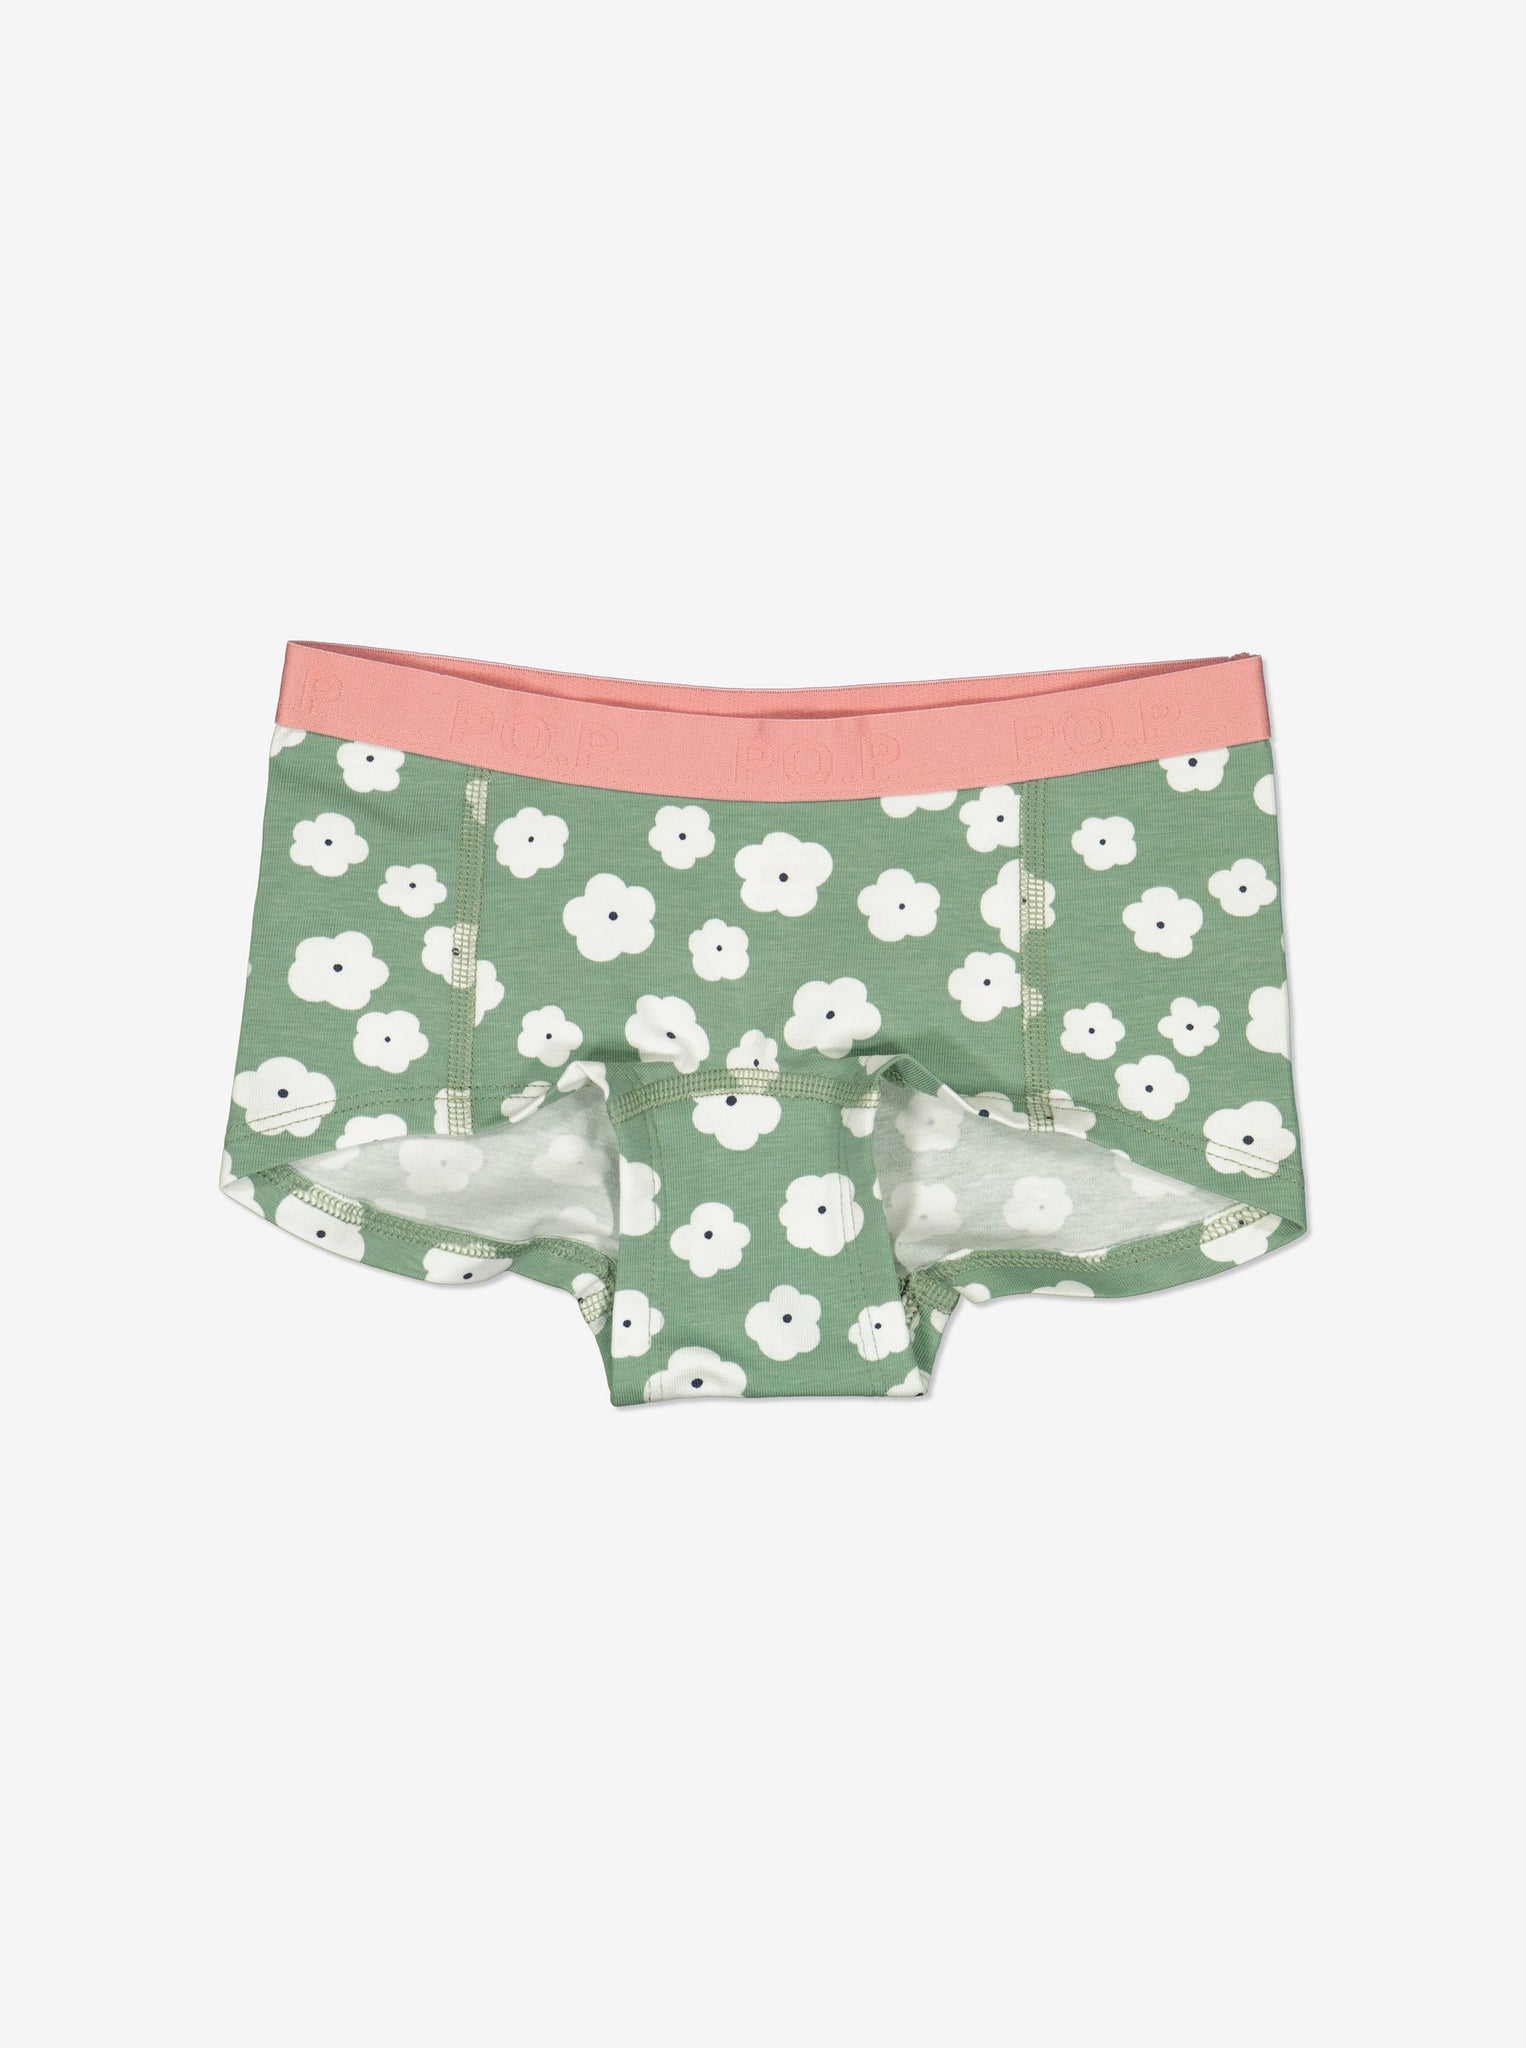  Organic Green Floral Girls Briefs from Polarn O. Pyret Kidswear. Made from sustainable materials.